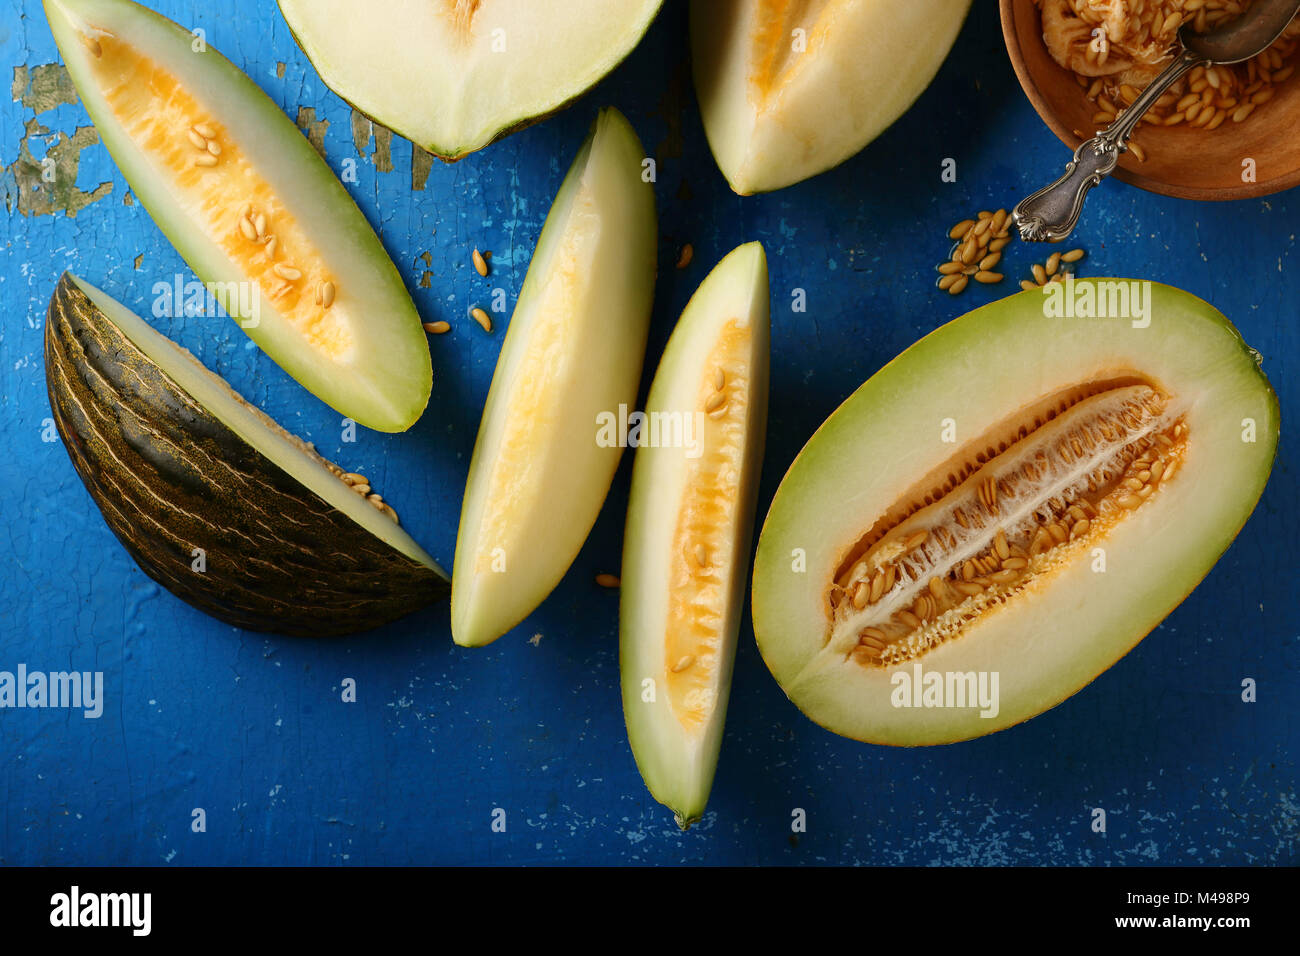 Slices of yellow melons, food above Stock Photo